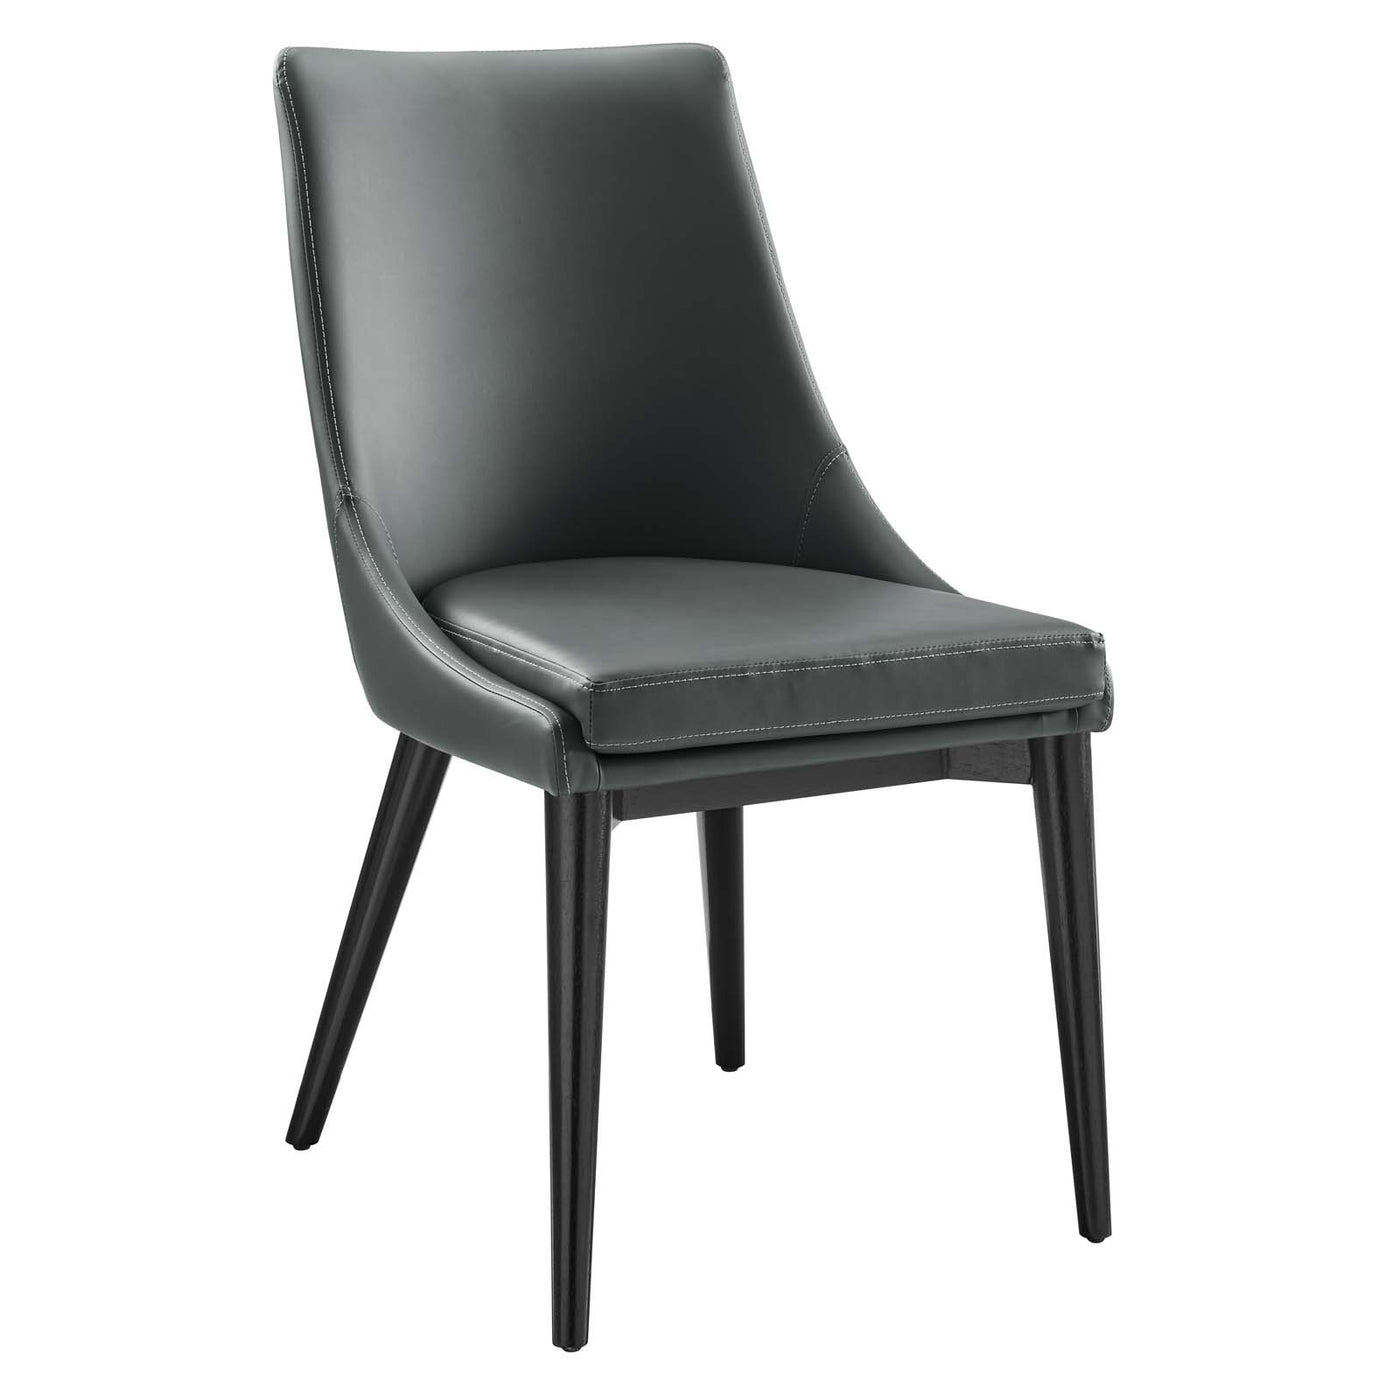 Viscount Vegan Leather Dining Chair